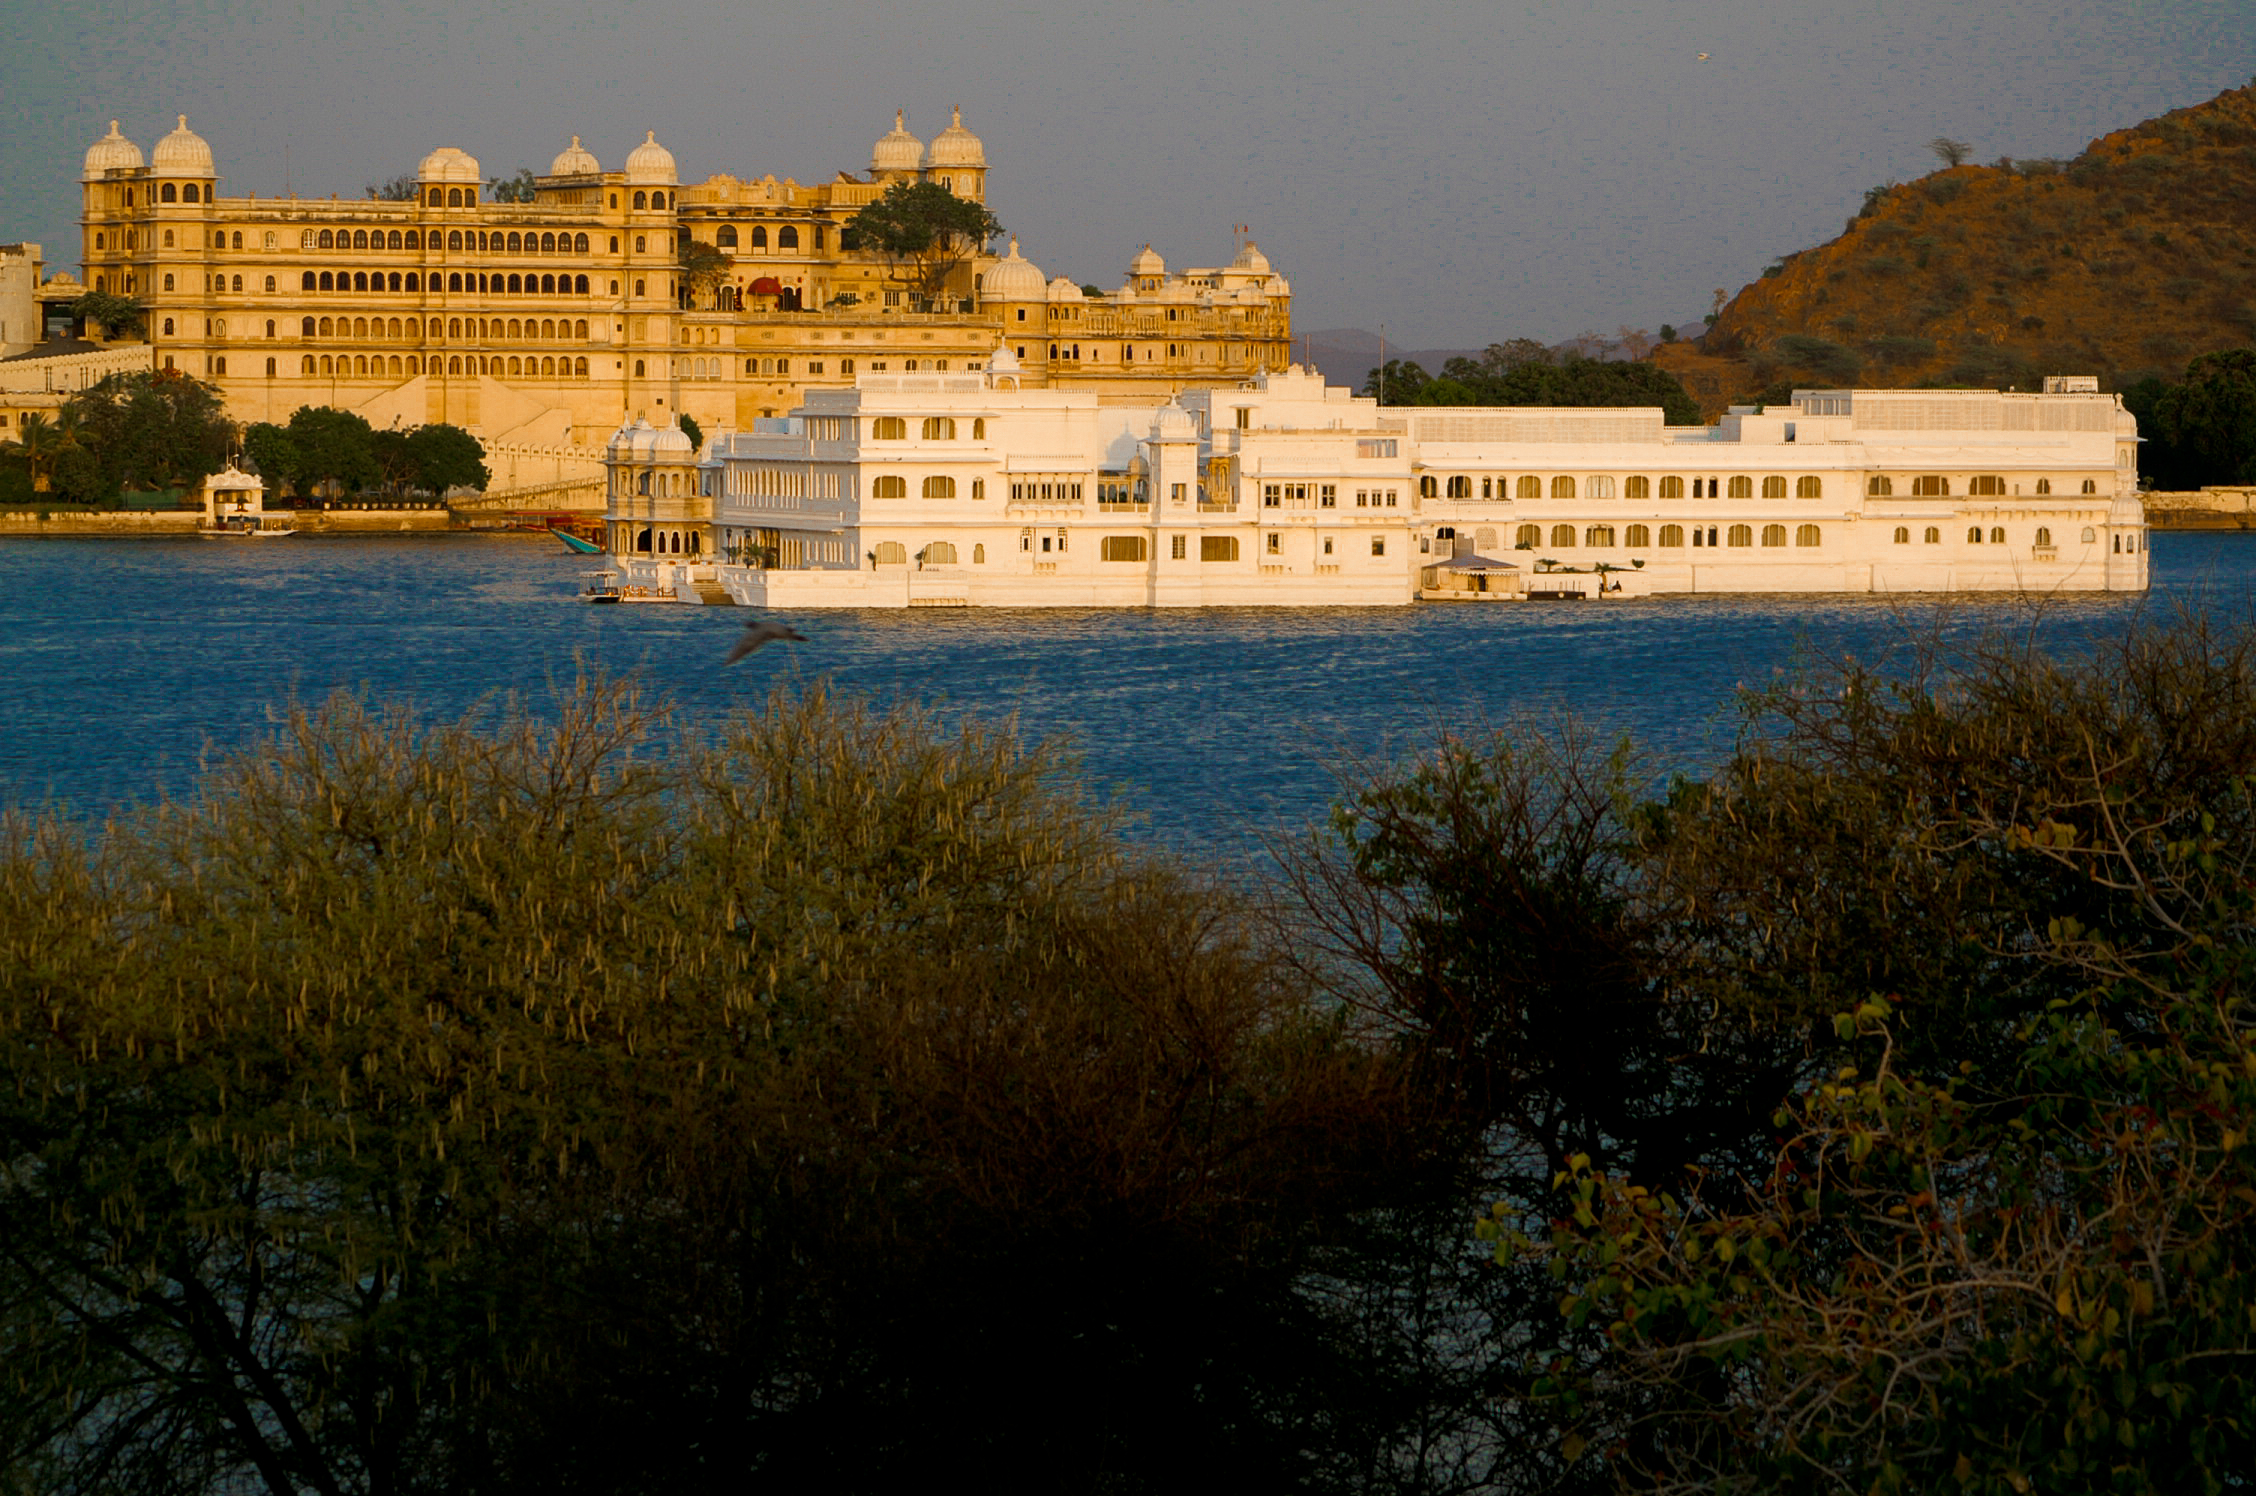 View from Oberoi Udaivilas on Lake Pichola with Lake Palace and Fateh Prakash Palace in Udaipur